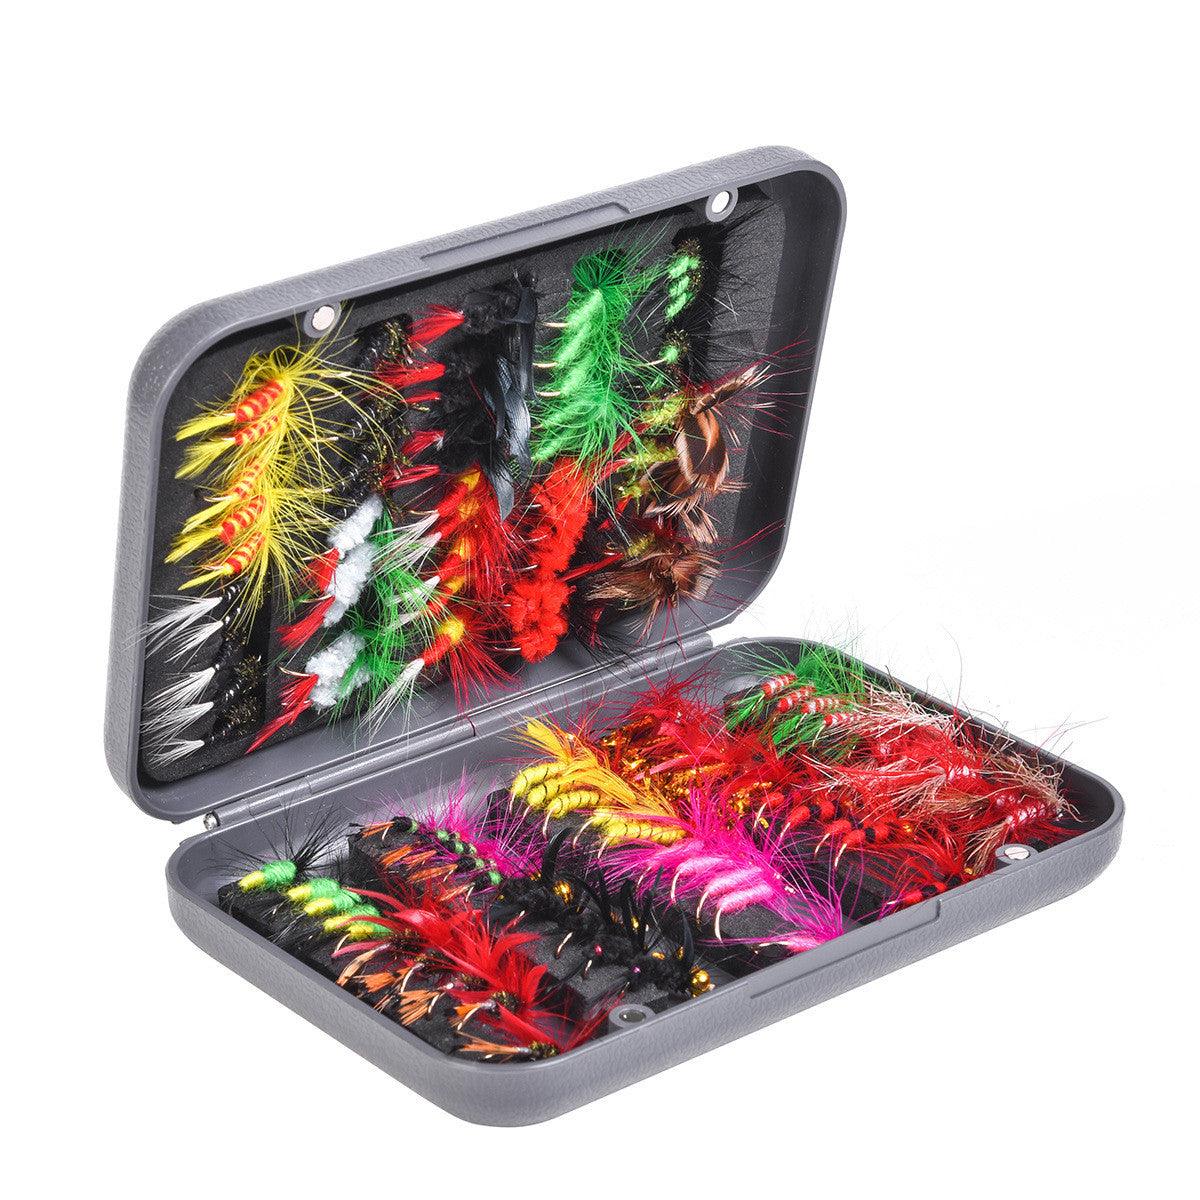 TrendyAffordables | Butterfly Bionic Fish Hook Lures for Budget-Friendly Fishing - TrendyAffordables - 0